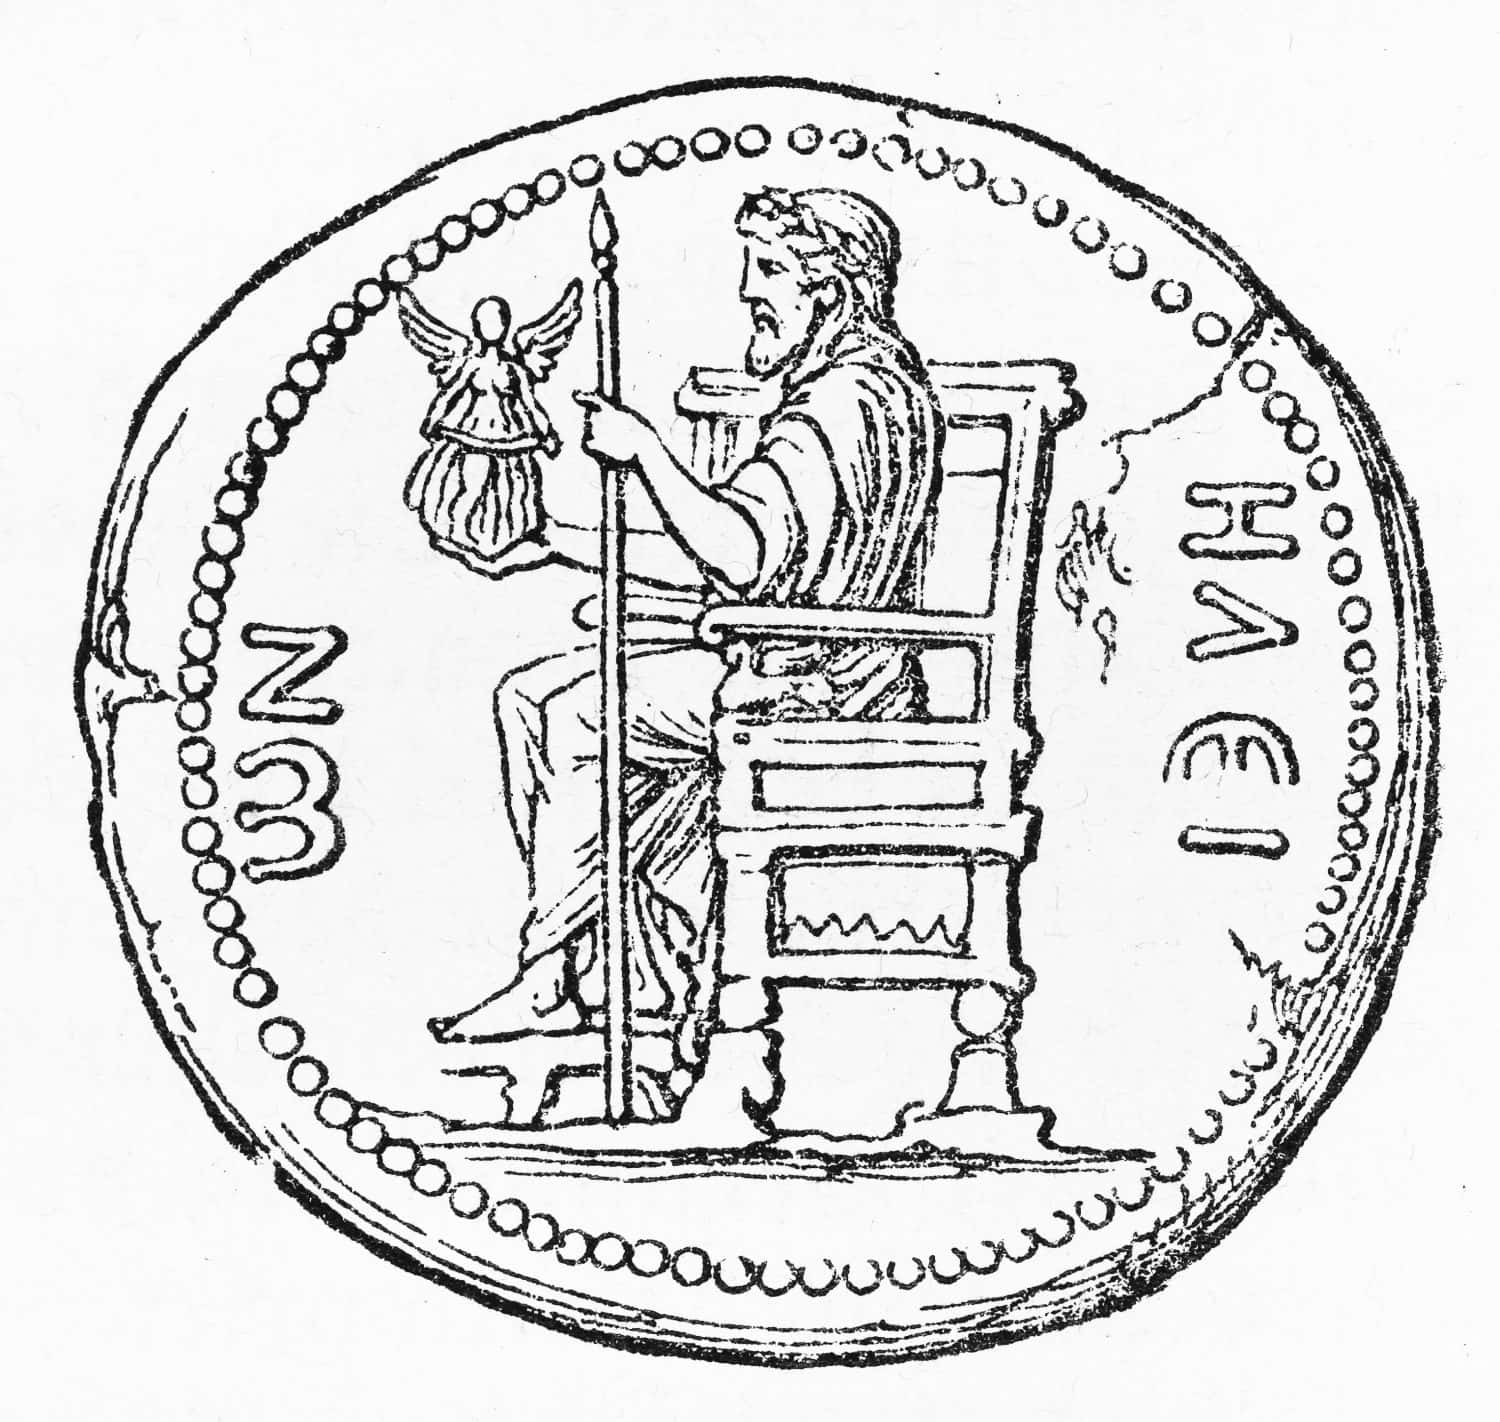 Ancient coin of Roman Emperor Hadrian, representing the statue of Zeus at Olympia - Picture from Meyers Lexicon books collection (written in German language) published in 1908, Germany.